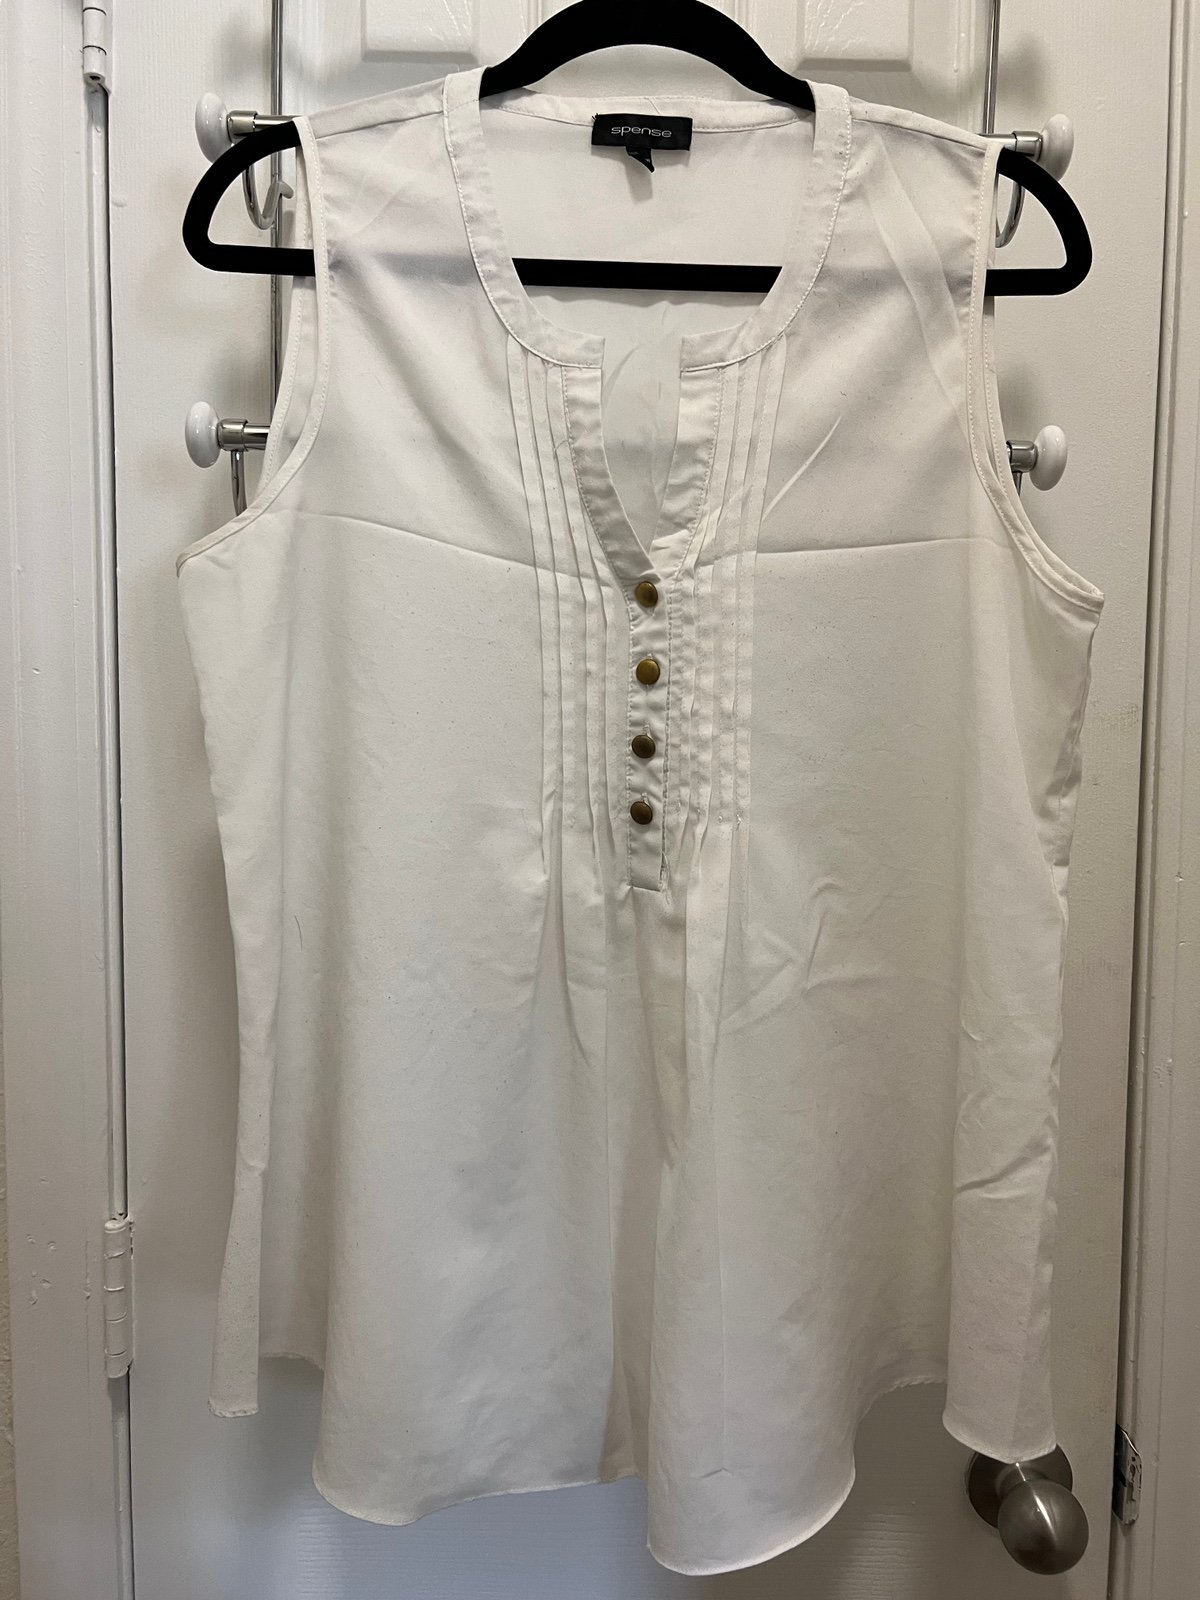 good price Sleeveless Blouse with Brass Buttons I40WGTp